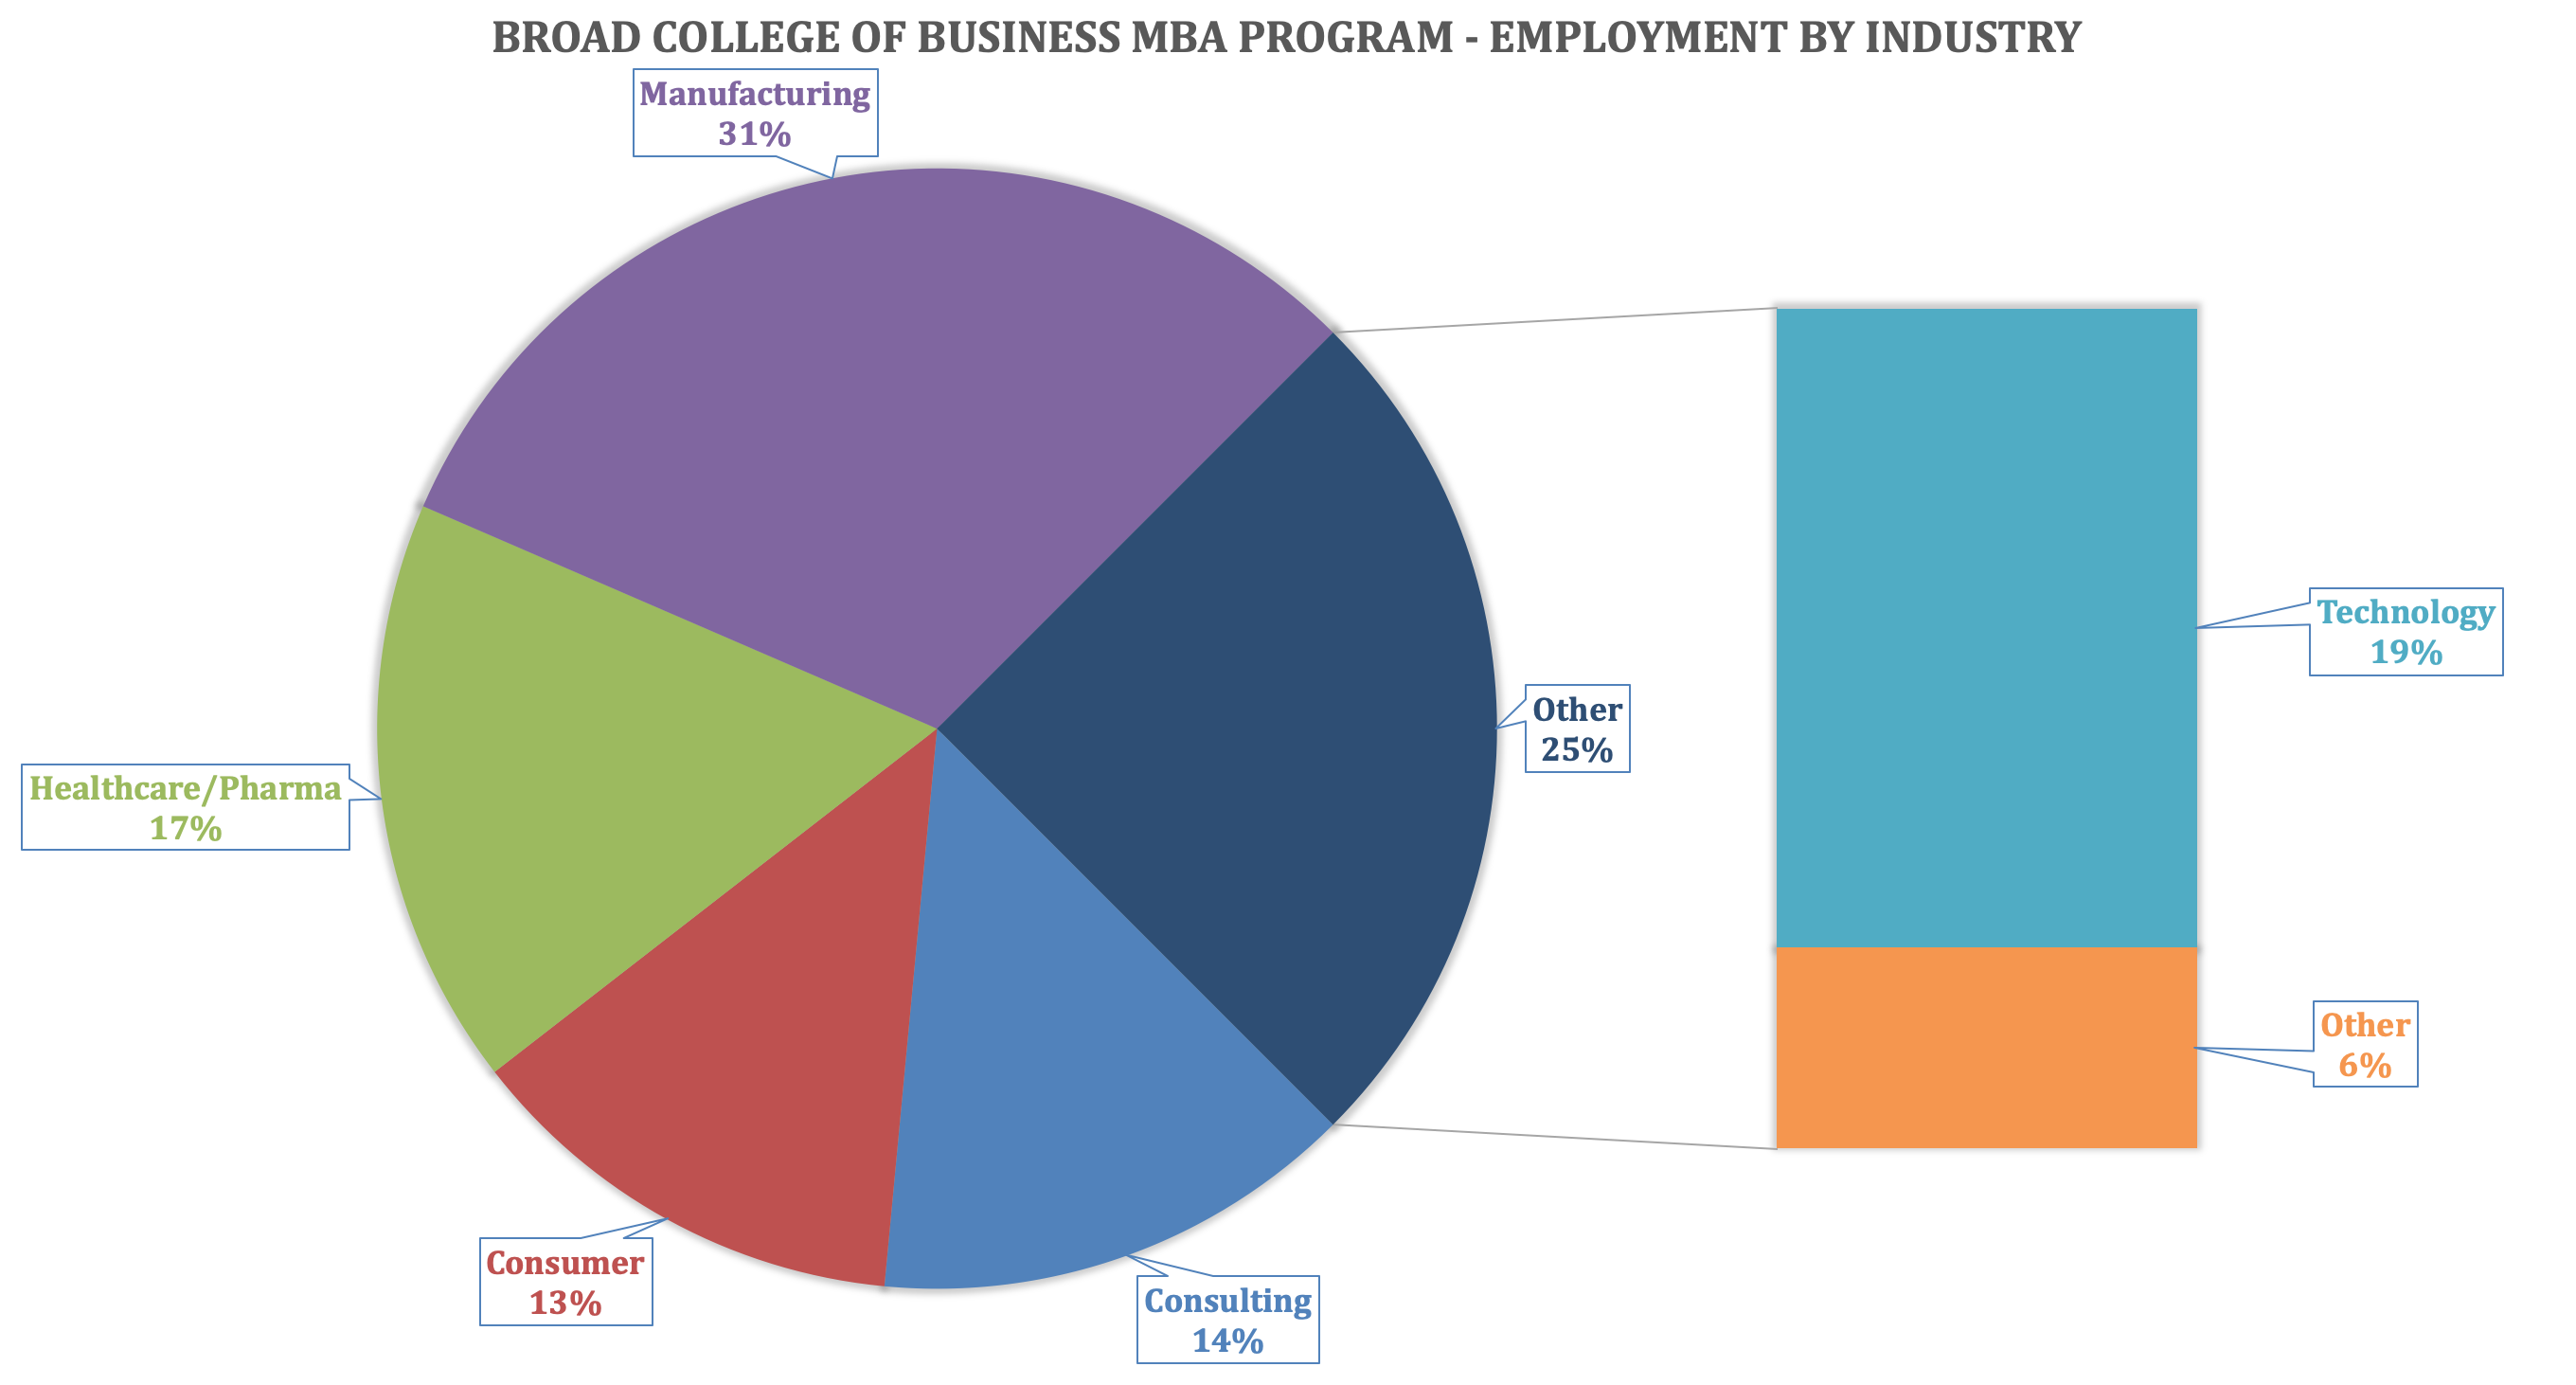 MSU MBA - Broad College of Business - Employment by Industry